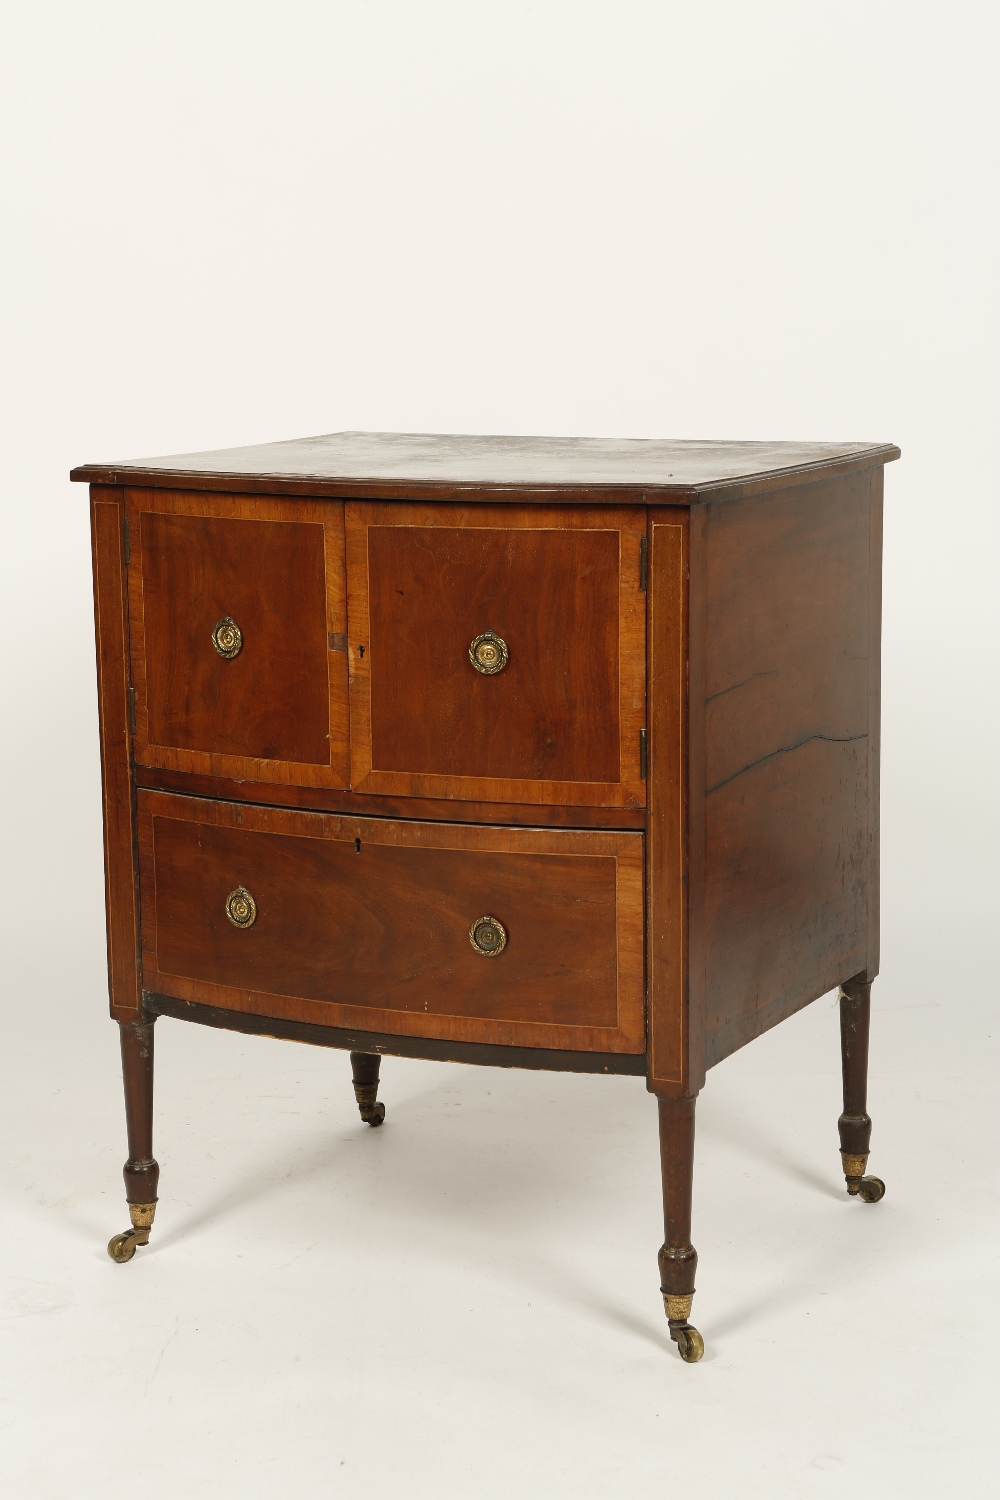 A GEORGE III MAHOGANY COMMODE, the rectangular bow-fronted top with satinwood crossbanding above